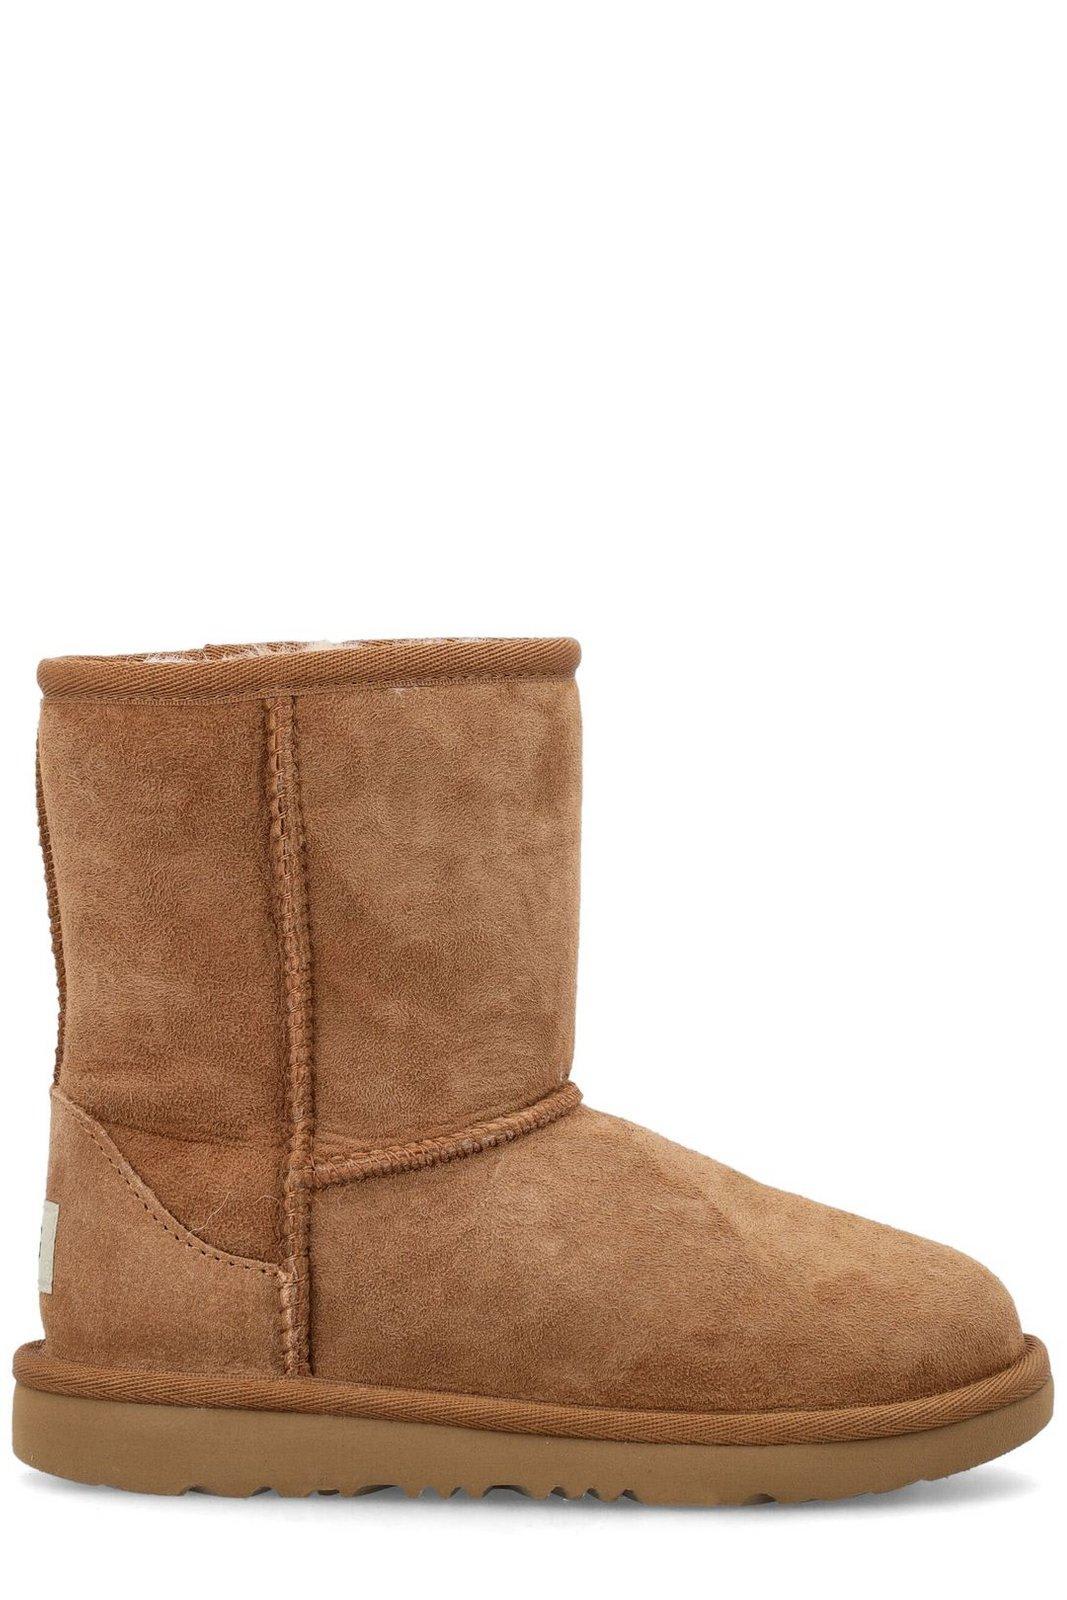 Shop Ugg Classic Ankle Boots In Brown